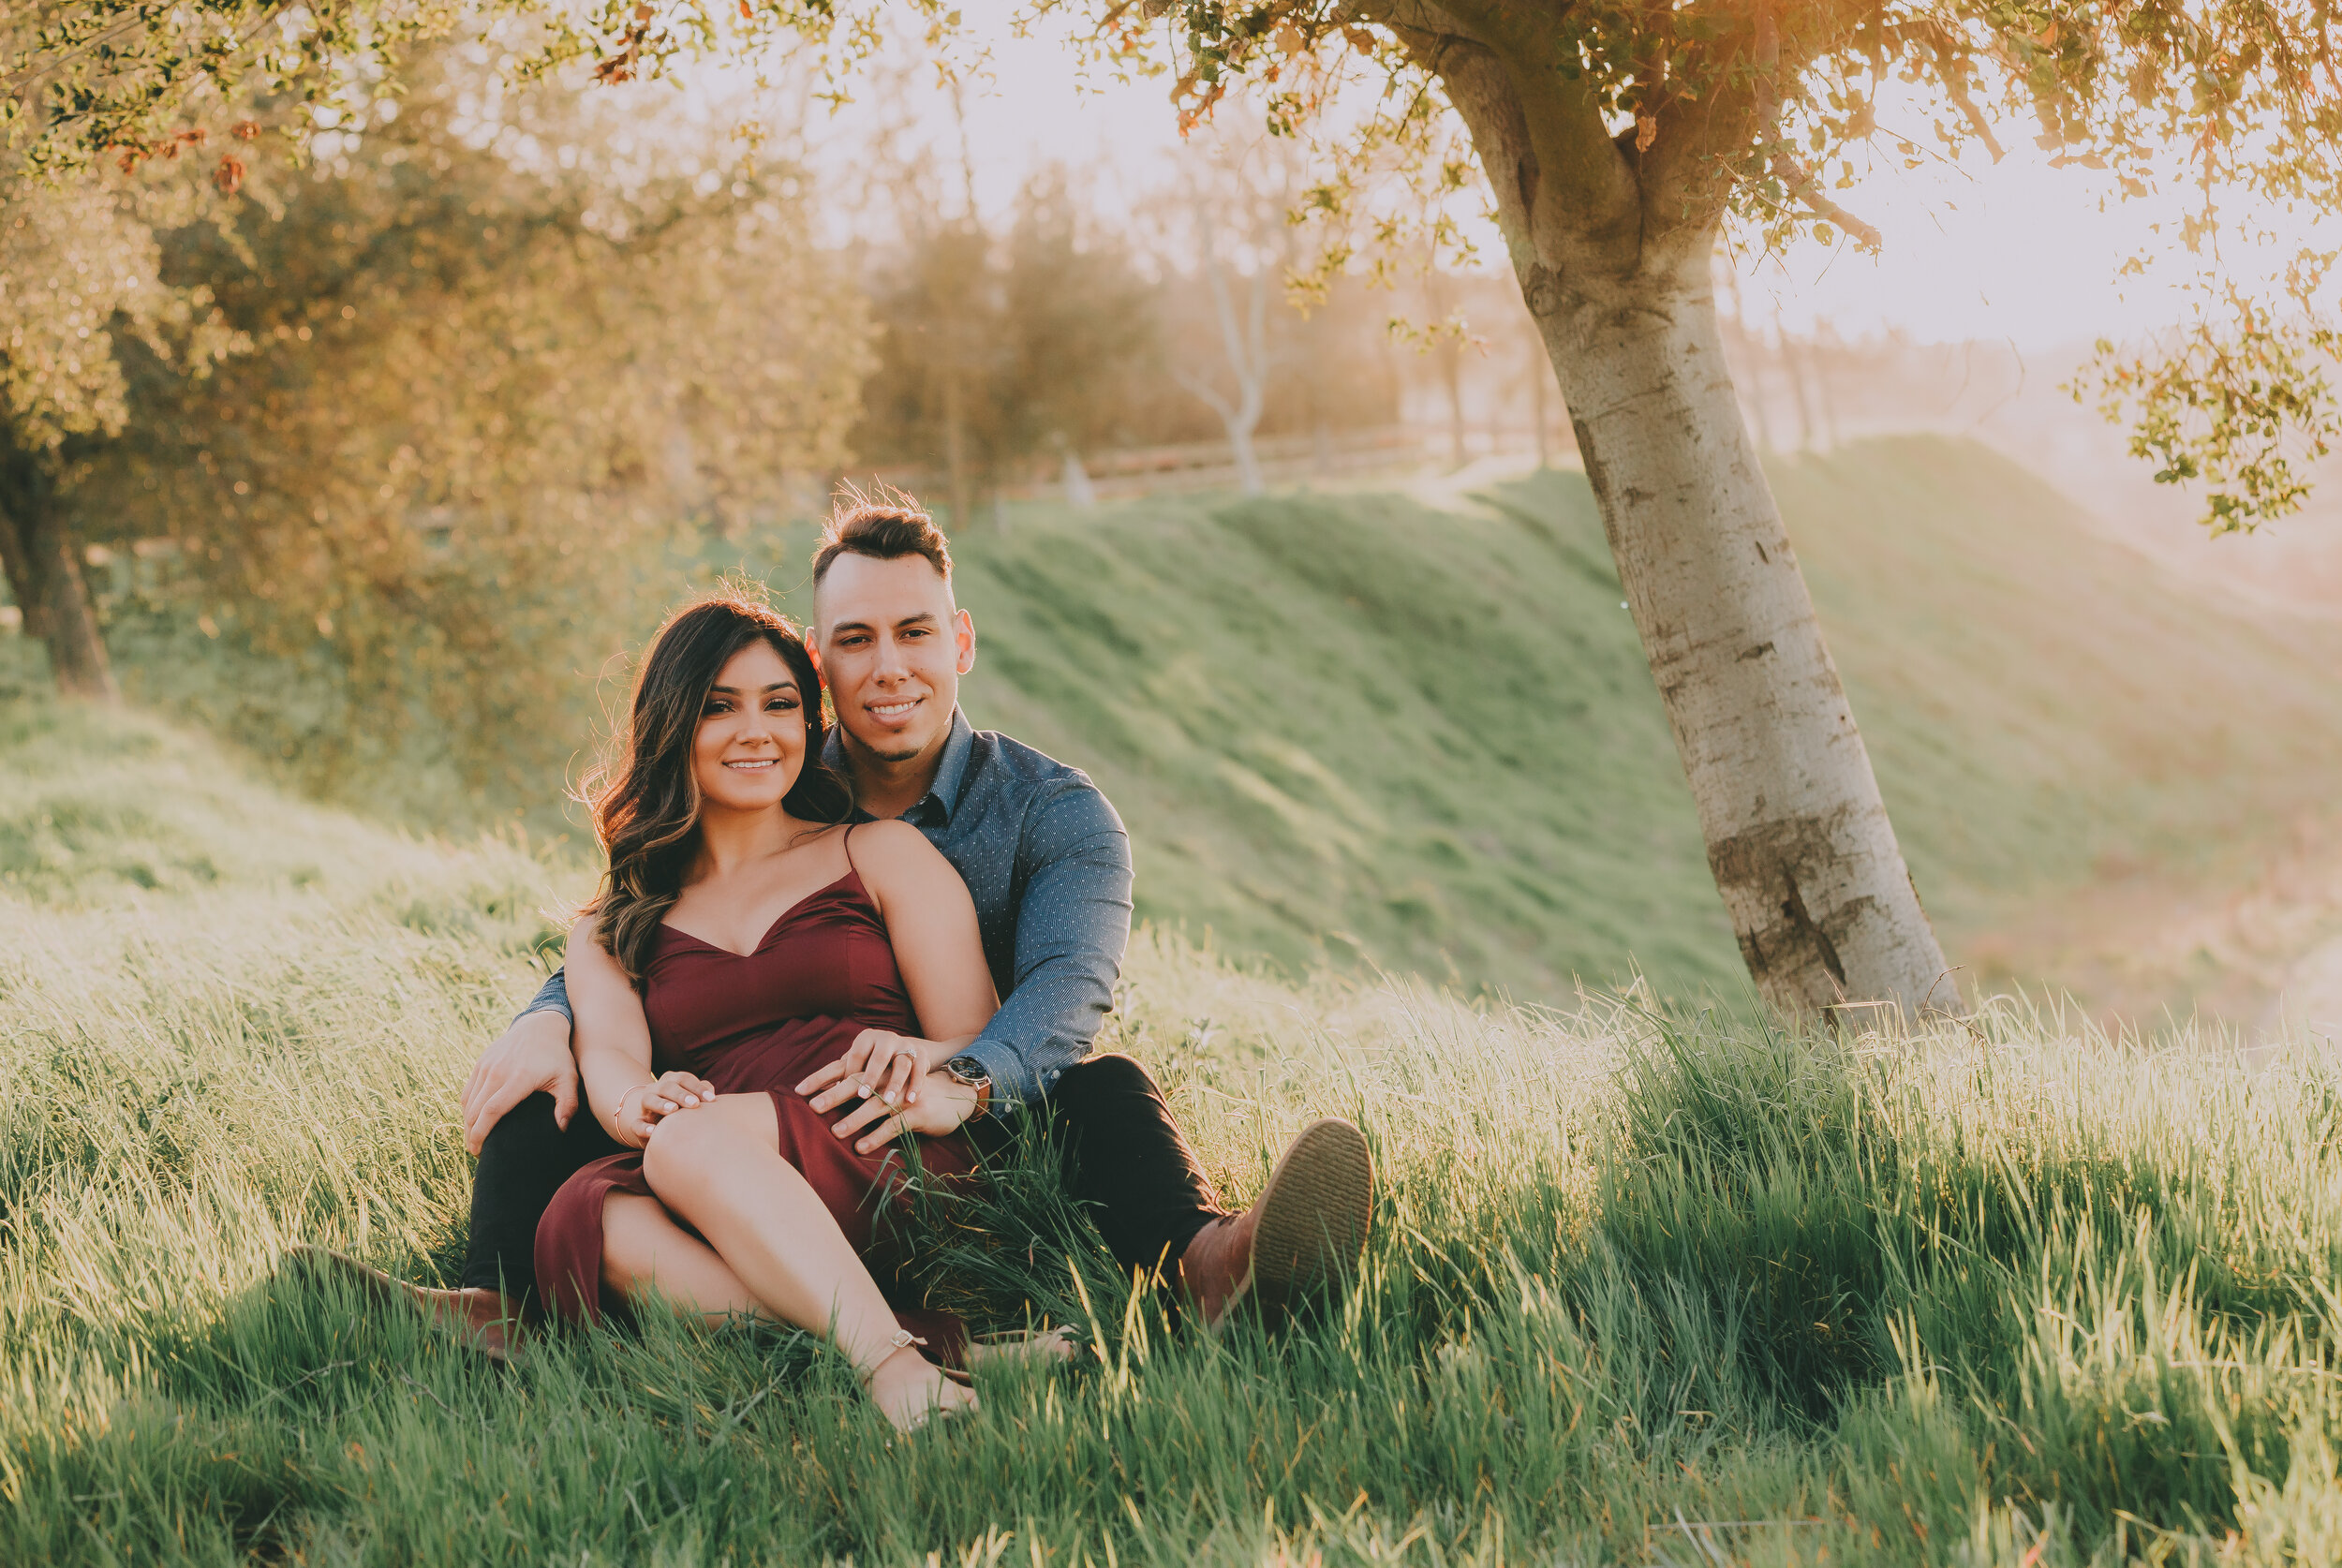 Fresno Engagament Photos - The Clausen Gallery - Samantha and Jesus-23.jpg